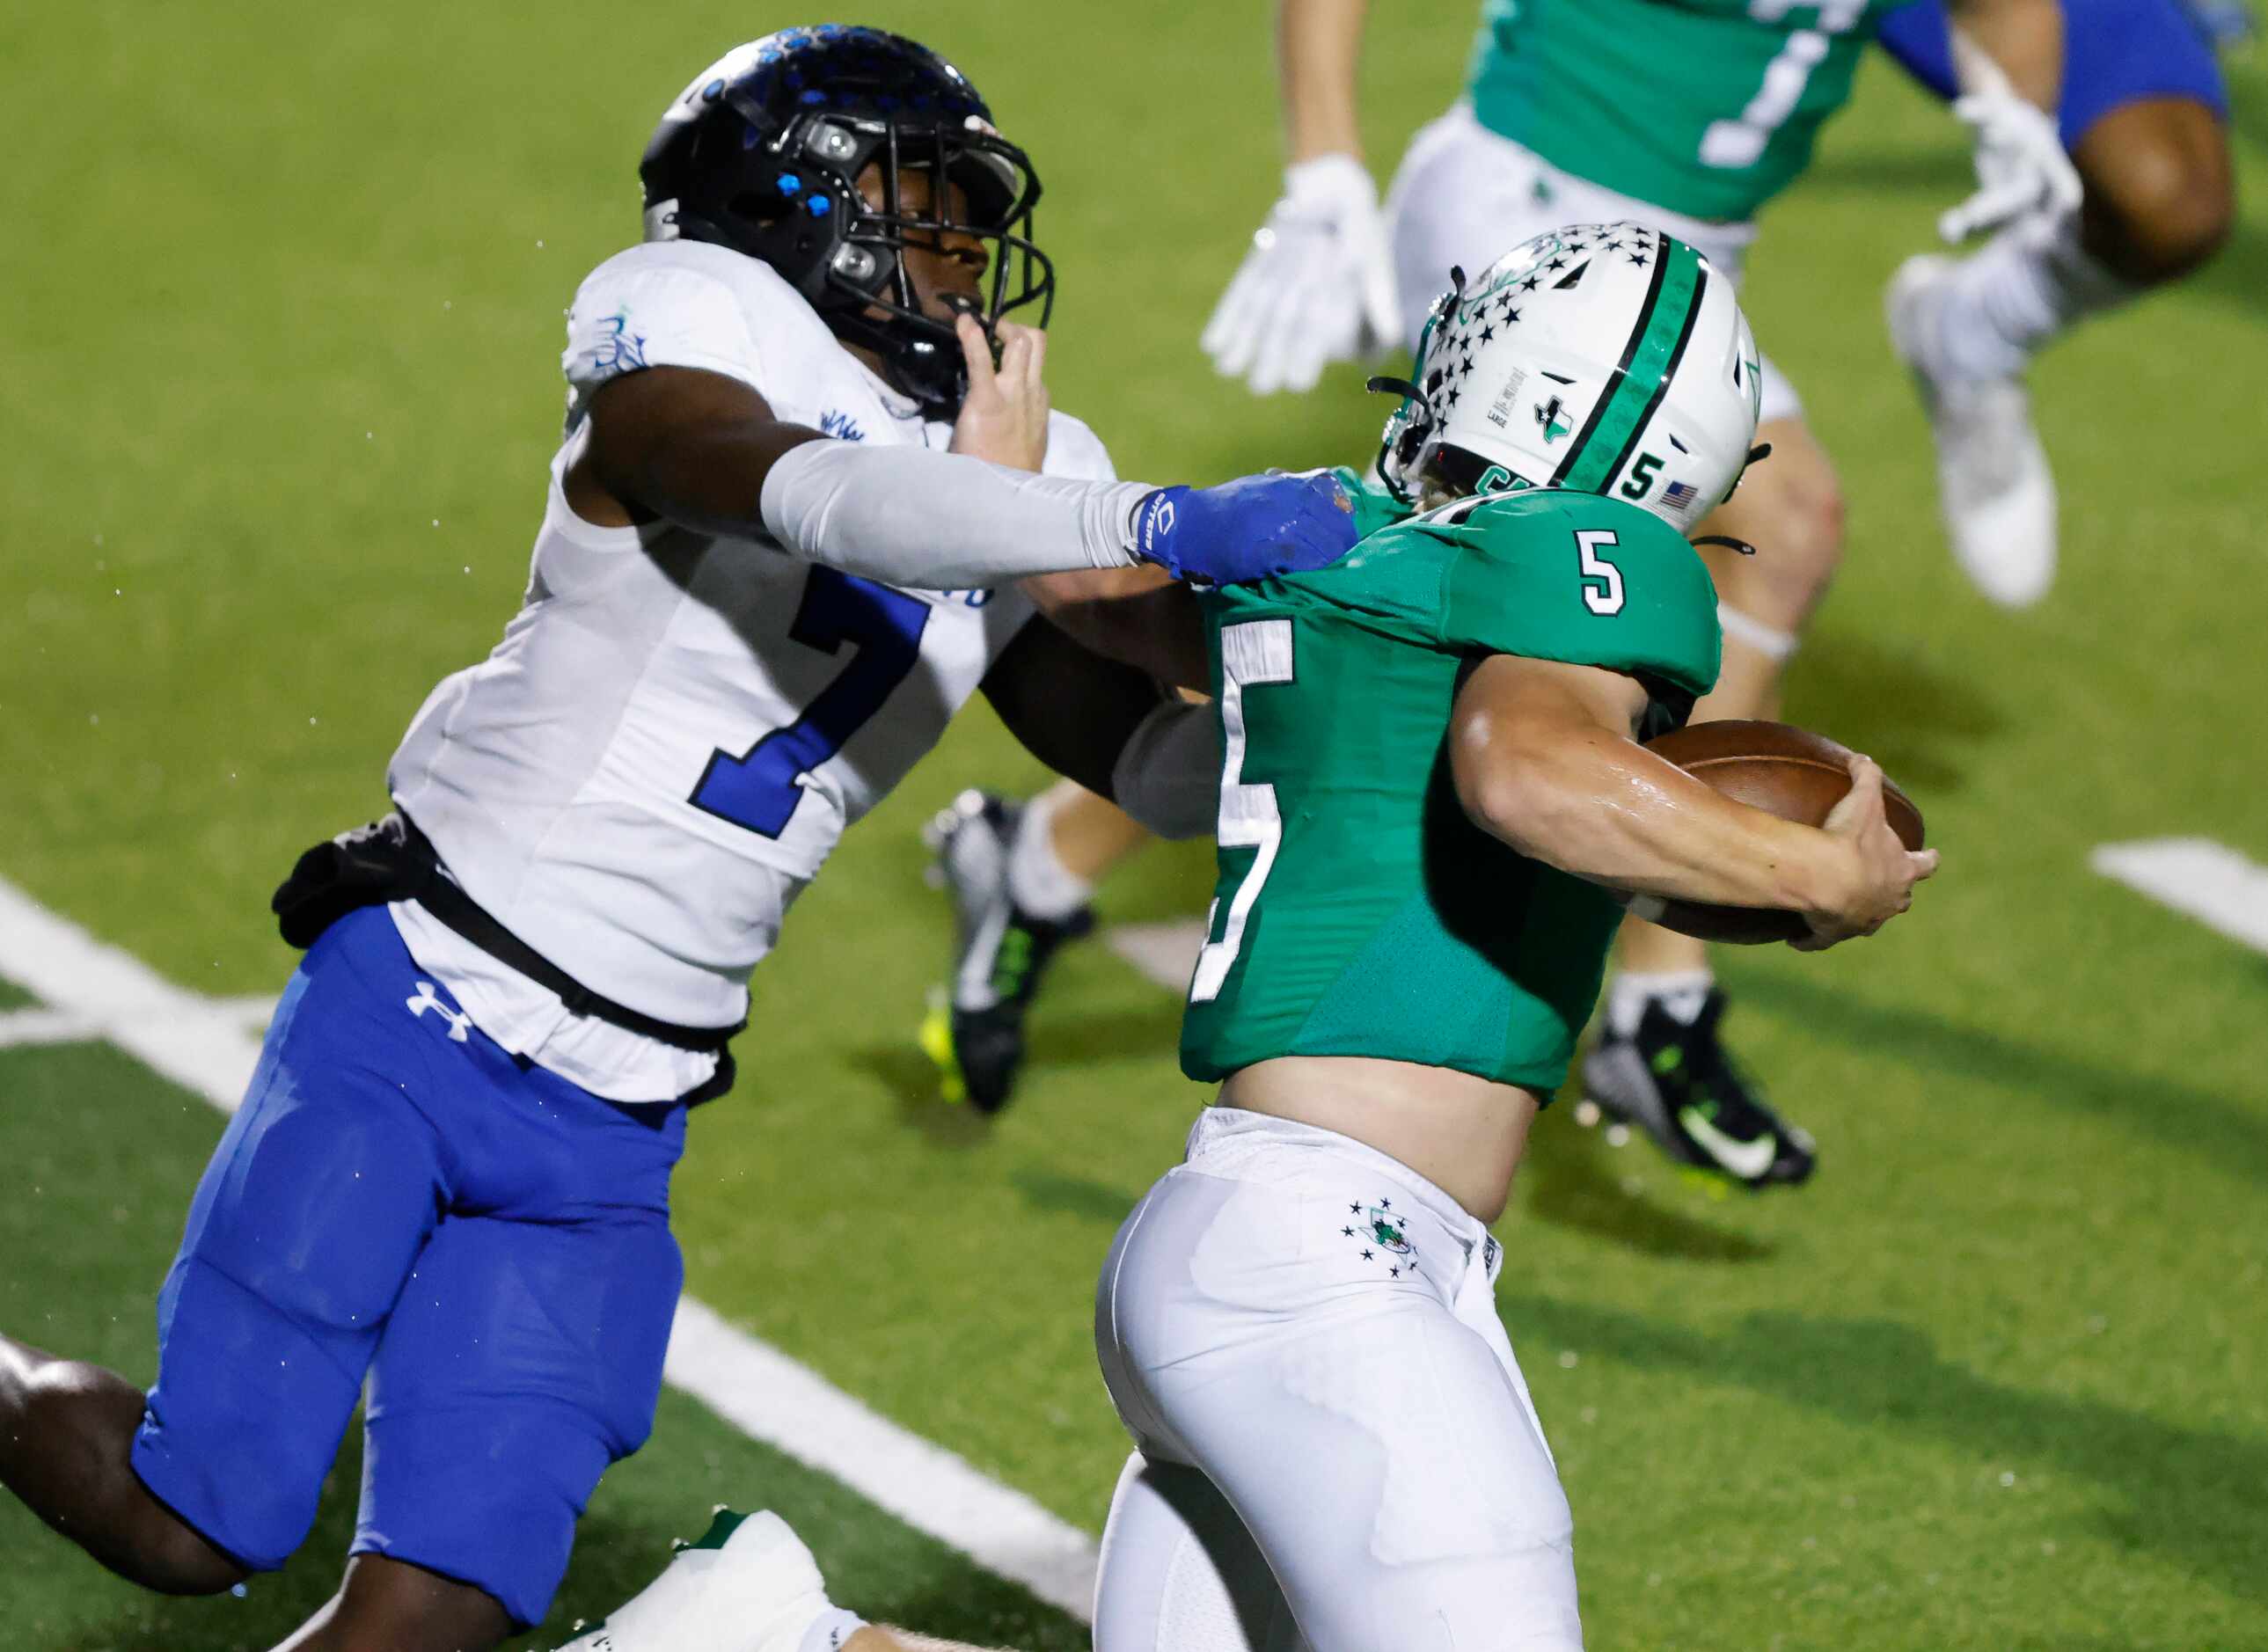 Southlake Carroll running back James Lehman (5) gives a stiff arm to Byron Nelson’s David...